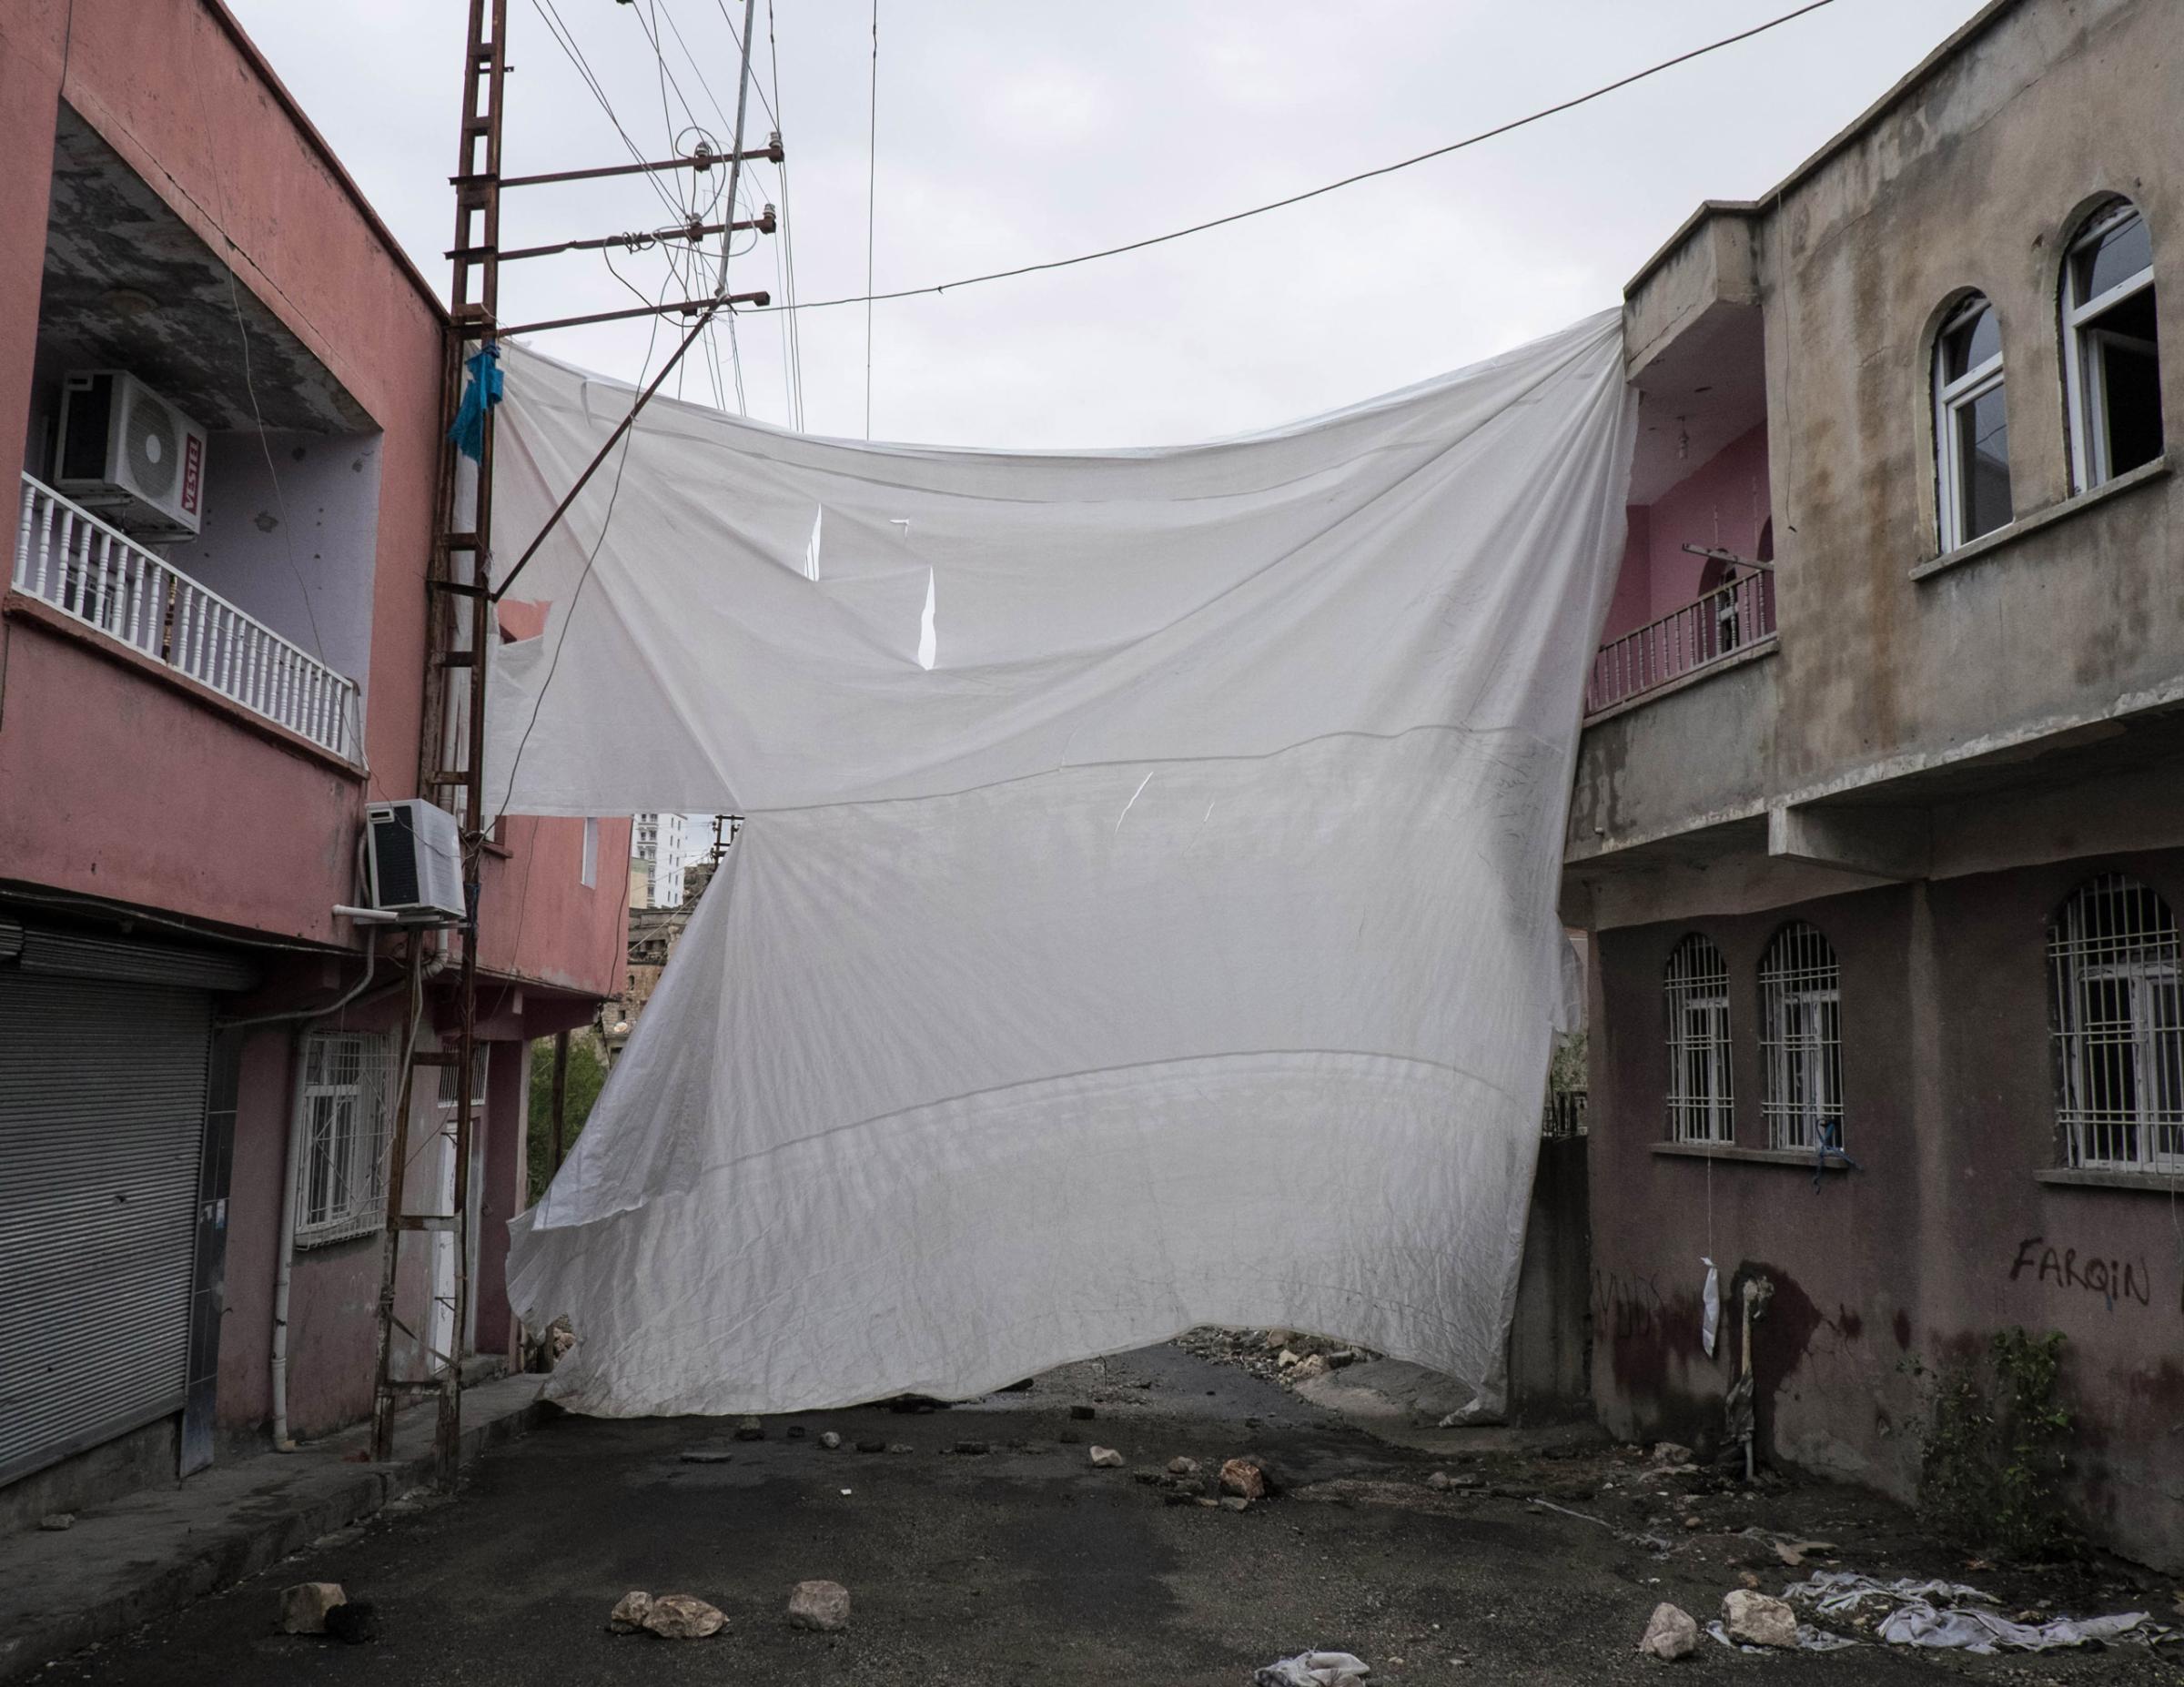 SILVAN, TURKEY - OCTOBER 27, 2015: A veil covers an entrance in the Tekel neighborhood. Since July the town of Silvan has been subjected to several curfews and teather of heavy clashes between Turkish military forces and Kurdish youh militia. A number of neighborhoods declared autonomy and built self-rule, with groups of young Kurds under the acronyms of HPG (People Defense Union) and YDGH (Patriotic Revolutionary Youth Movement) who have taken up arms and raise barricades to prevent the advances of the Turkish forces.